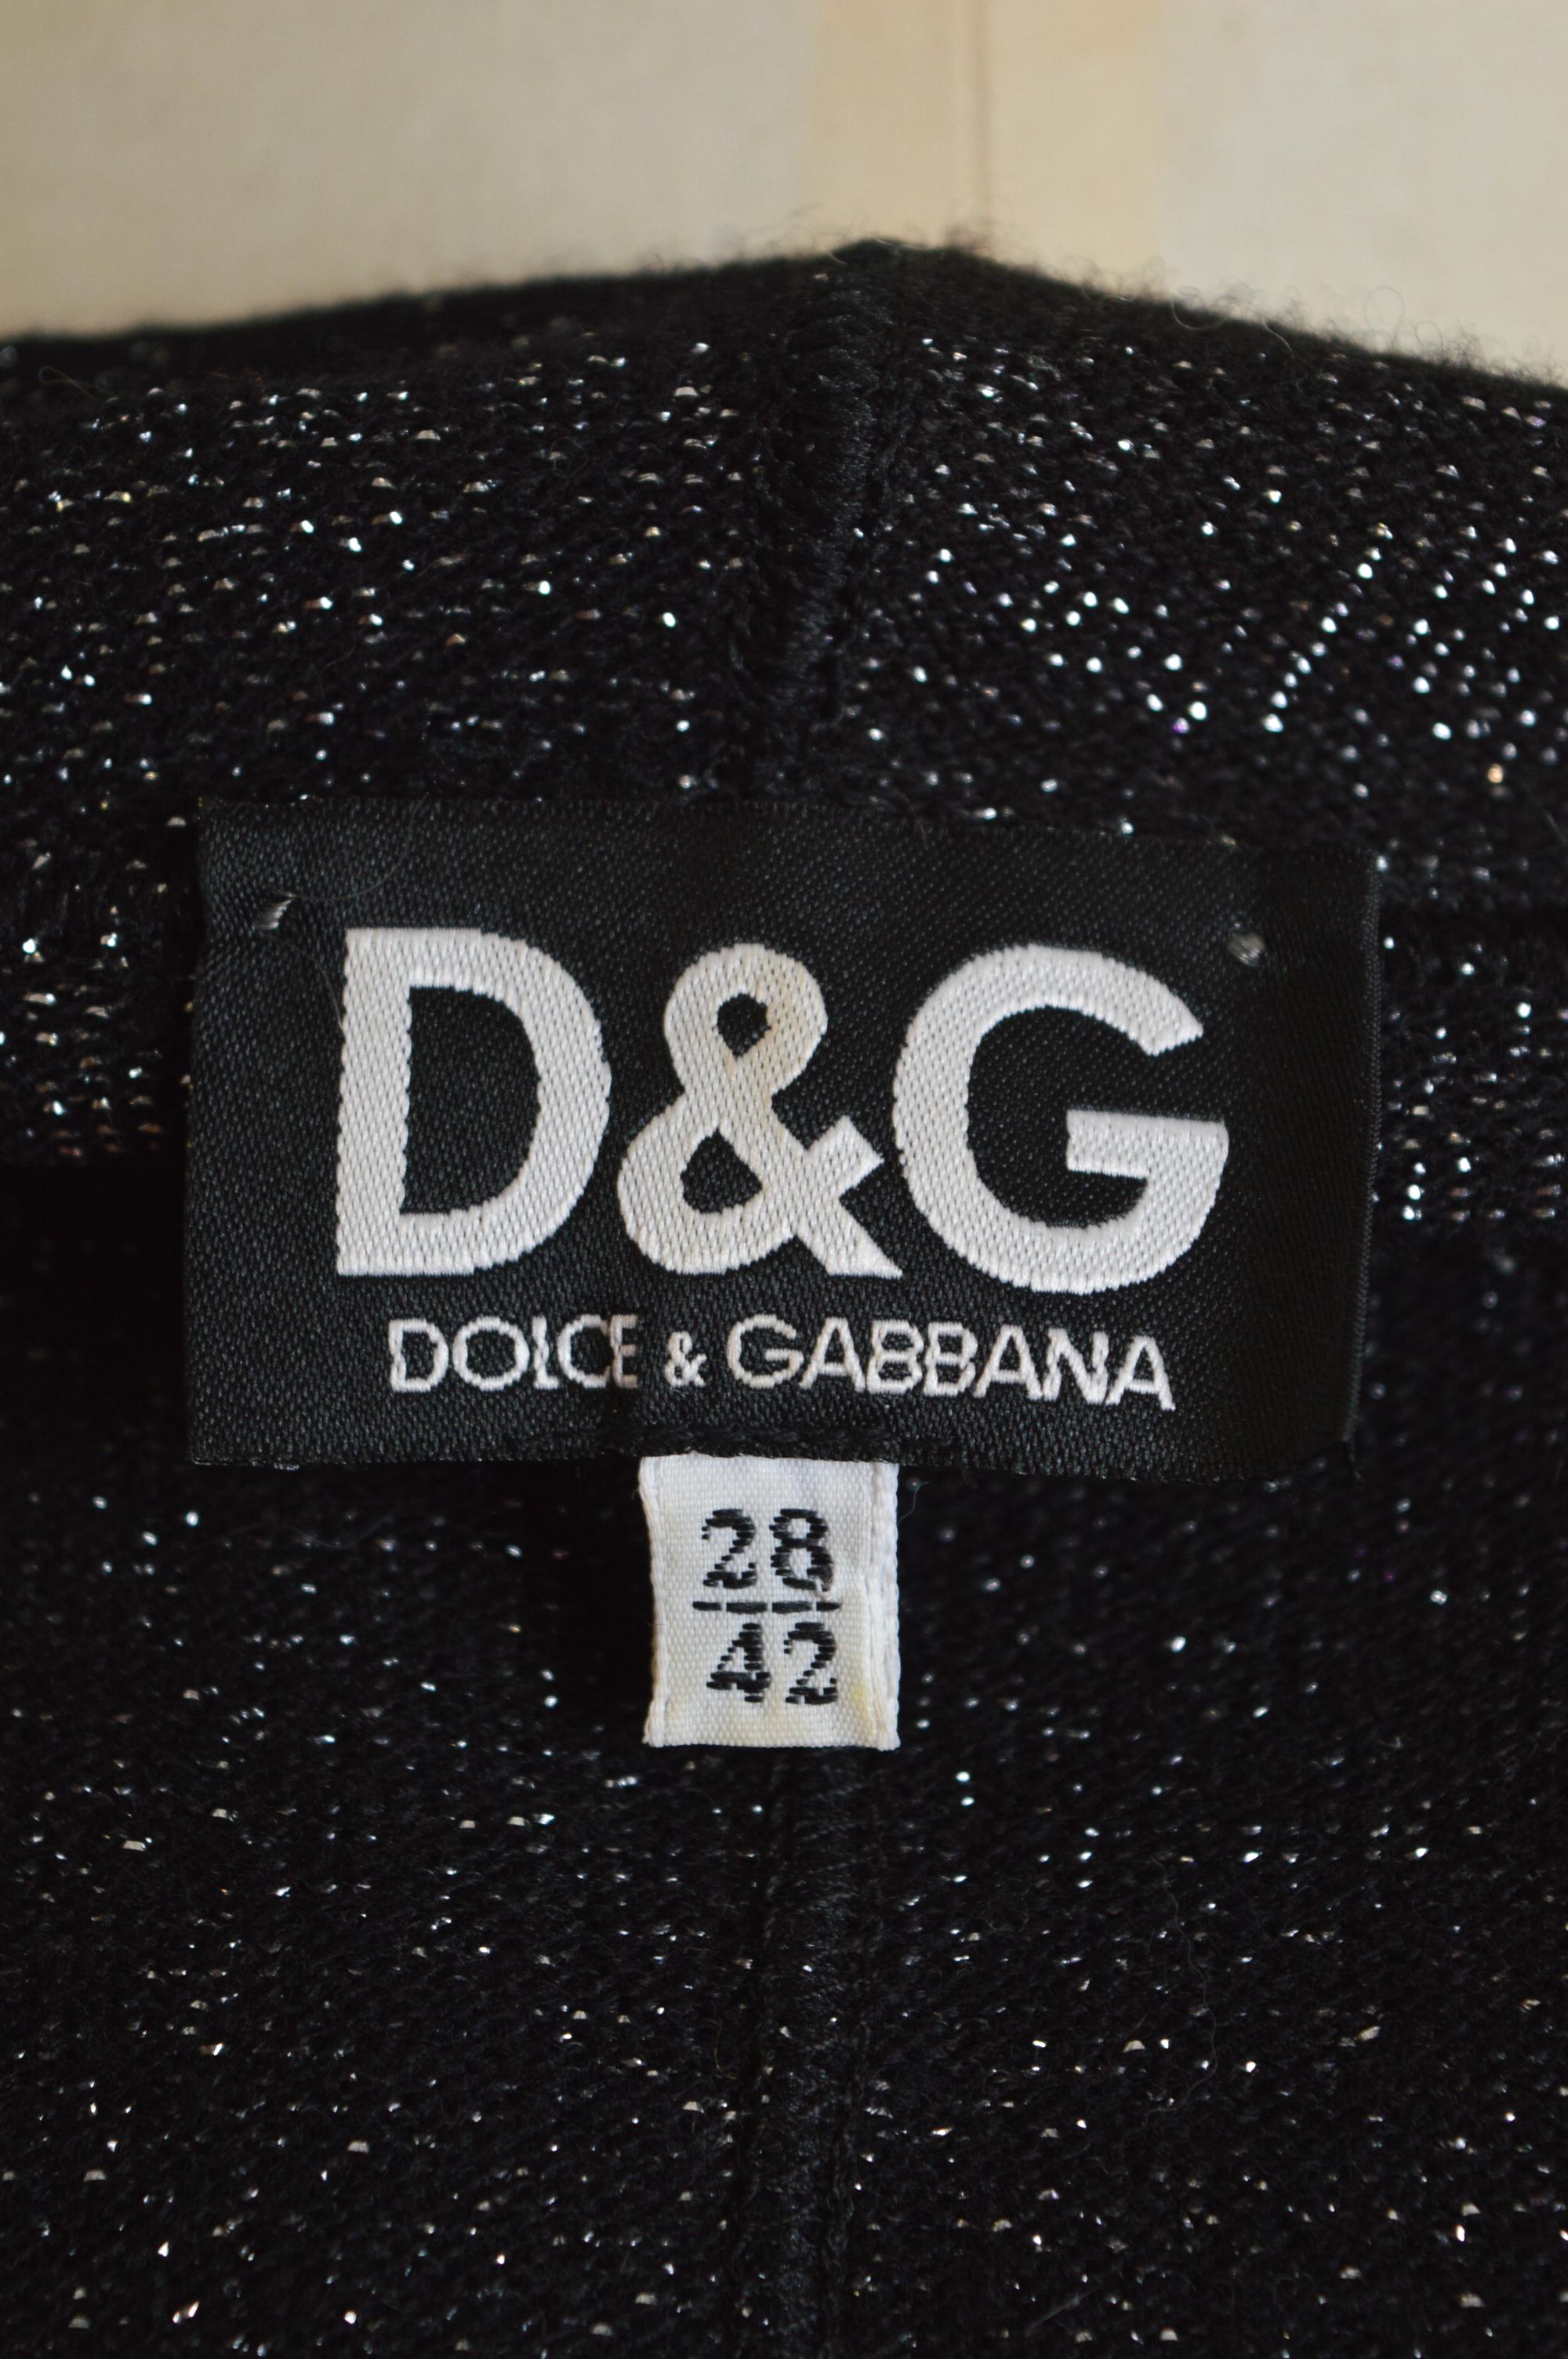 Y2k DOLCE & GABBANA Sparkly Silver Lamé Knit Hooded Zip Up Cardigan Jacket For Sale 1